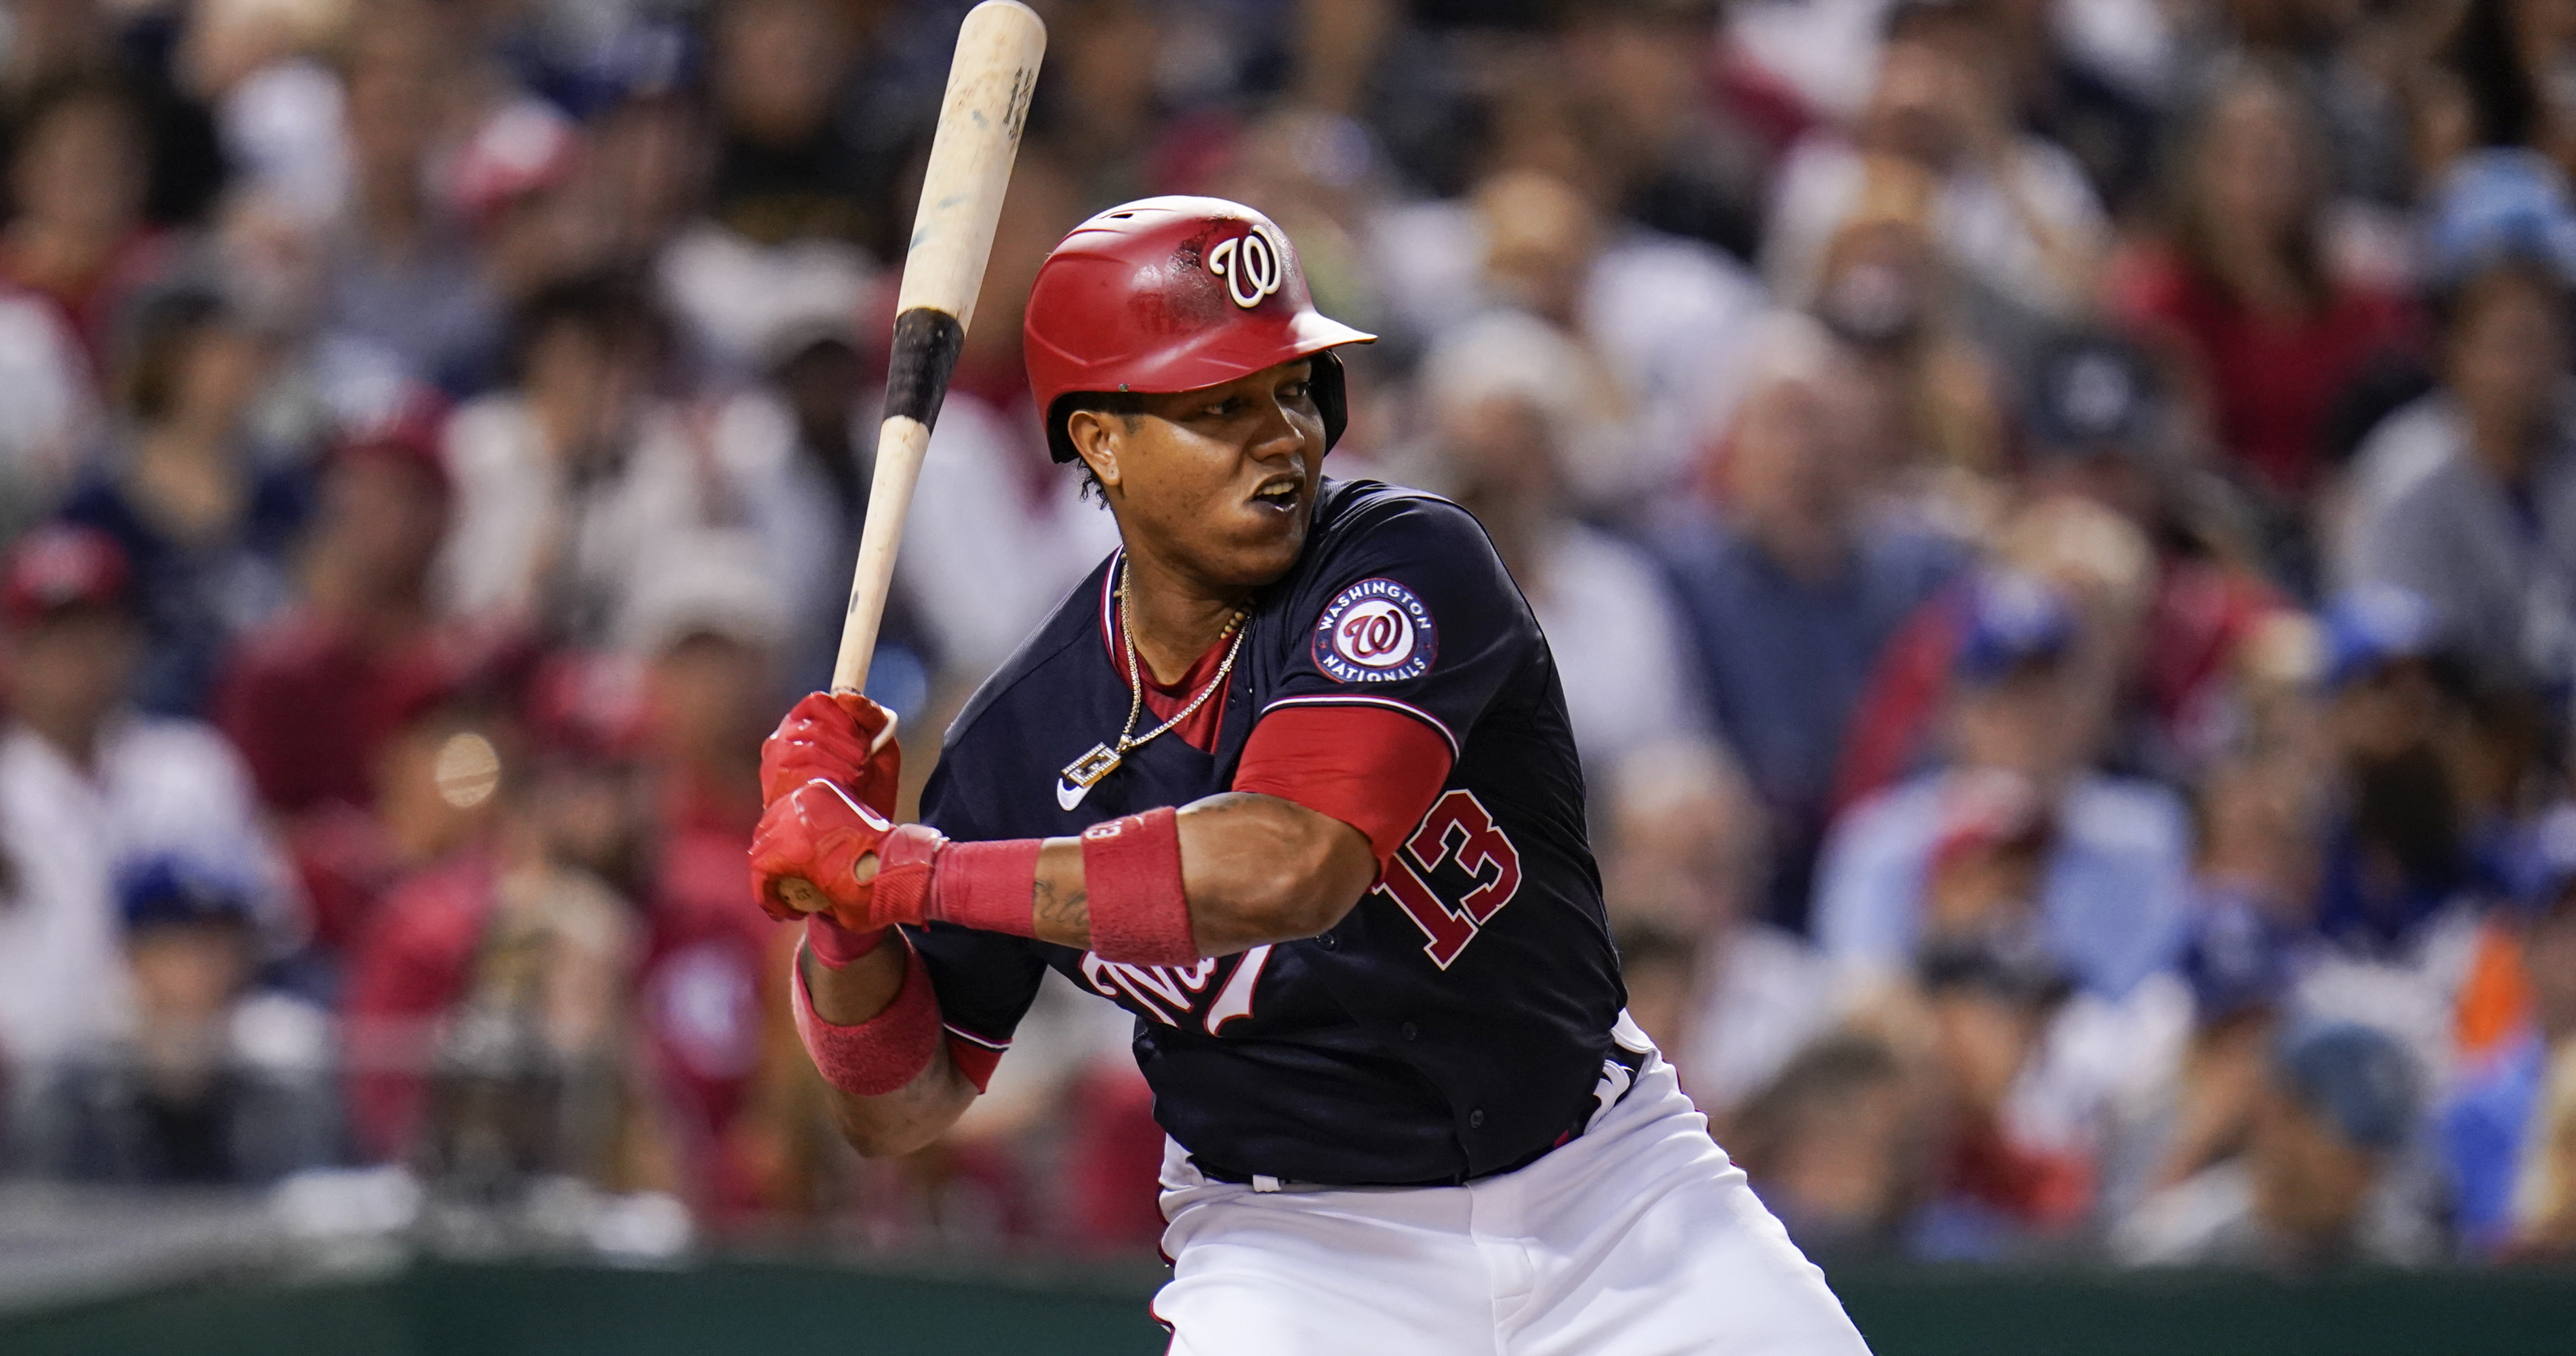 Washington Nationals reportedly sign Starlin Castro to 2-year/$12M deal to  play second base in D.C. - Federal Baseball